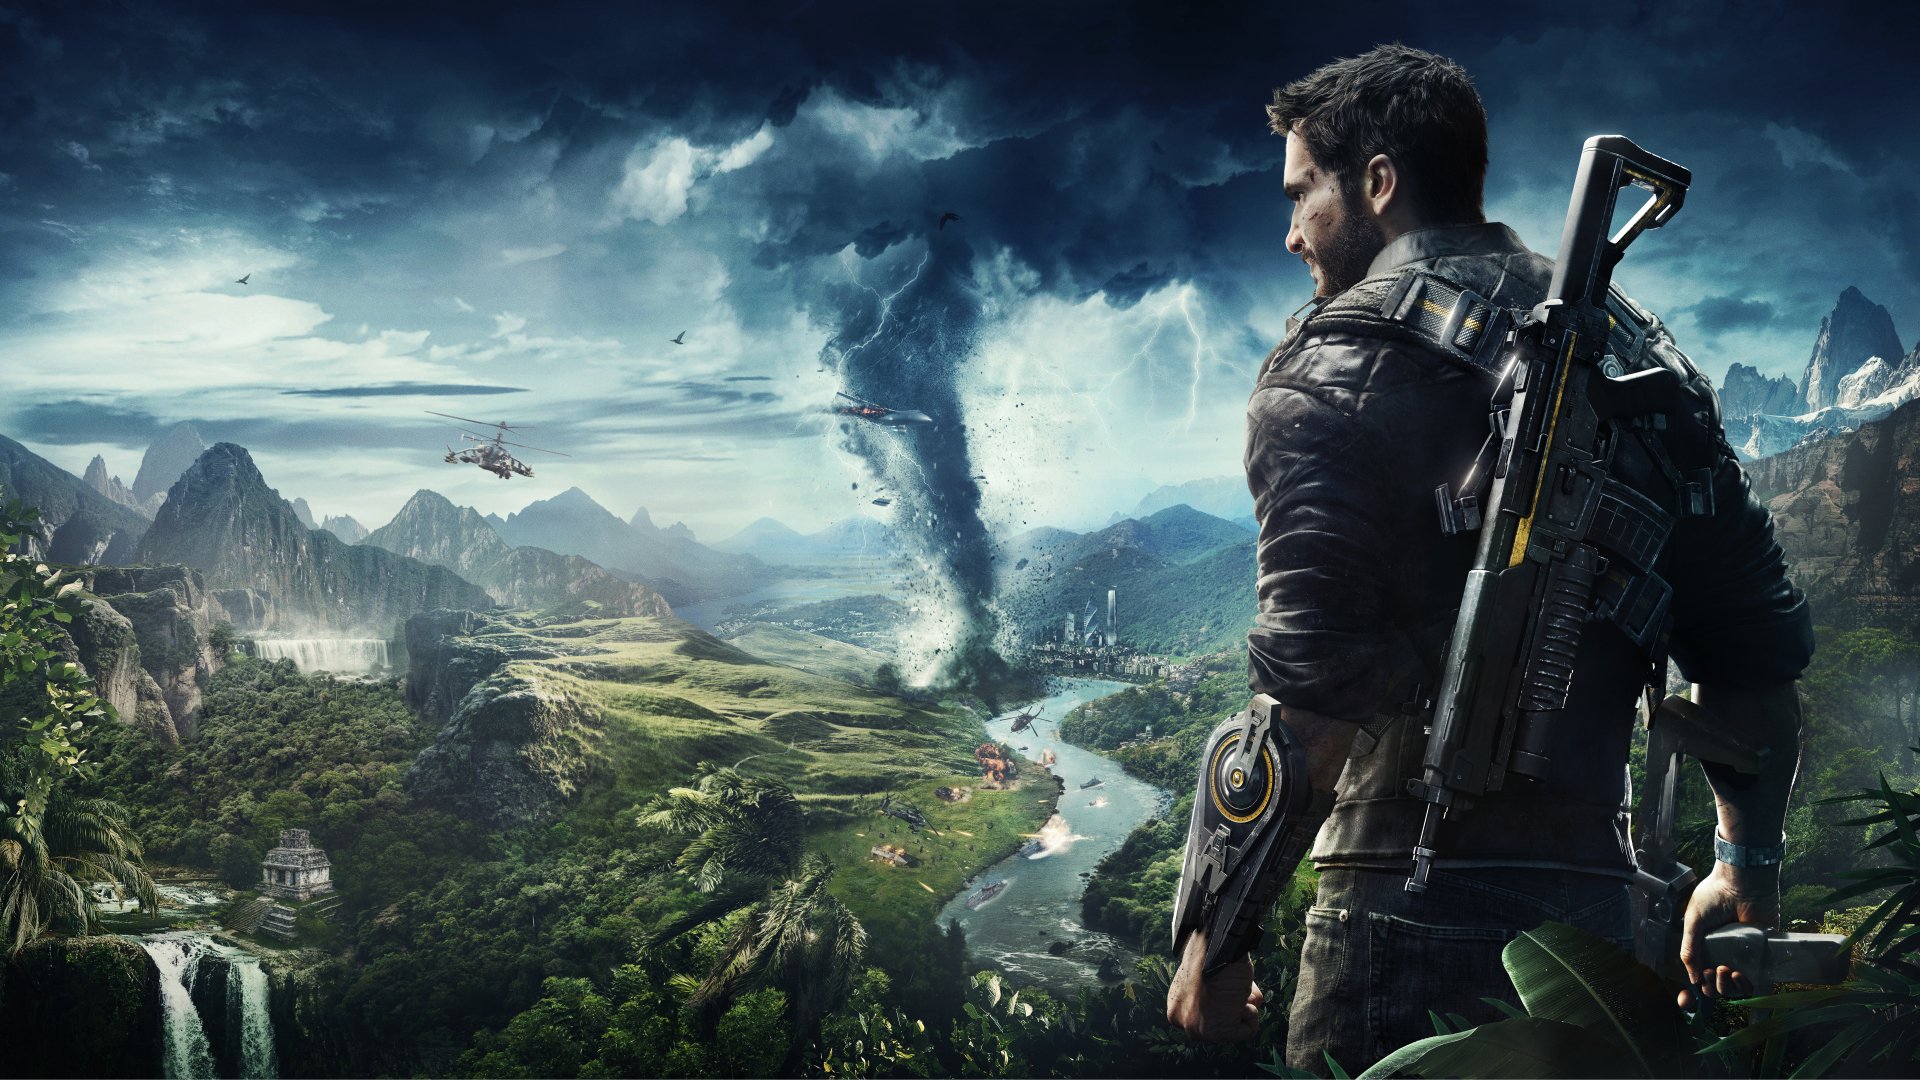 hd just cause 4 wallpapers